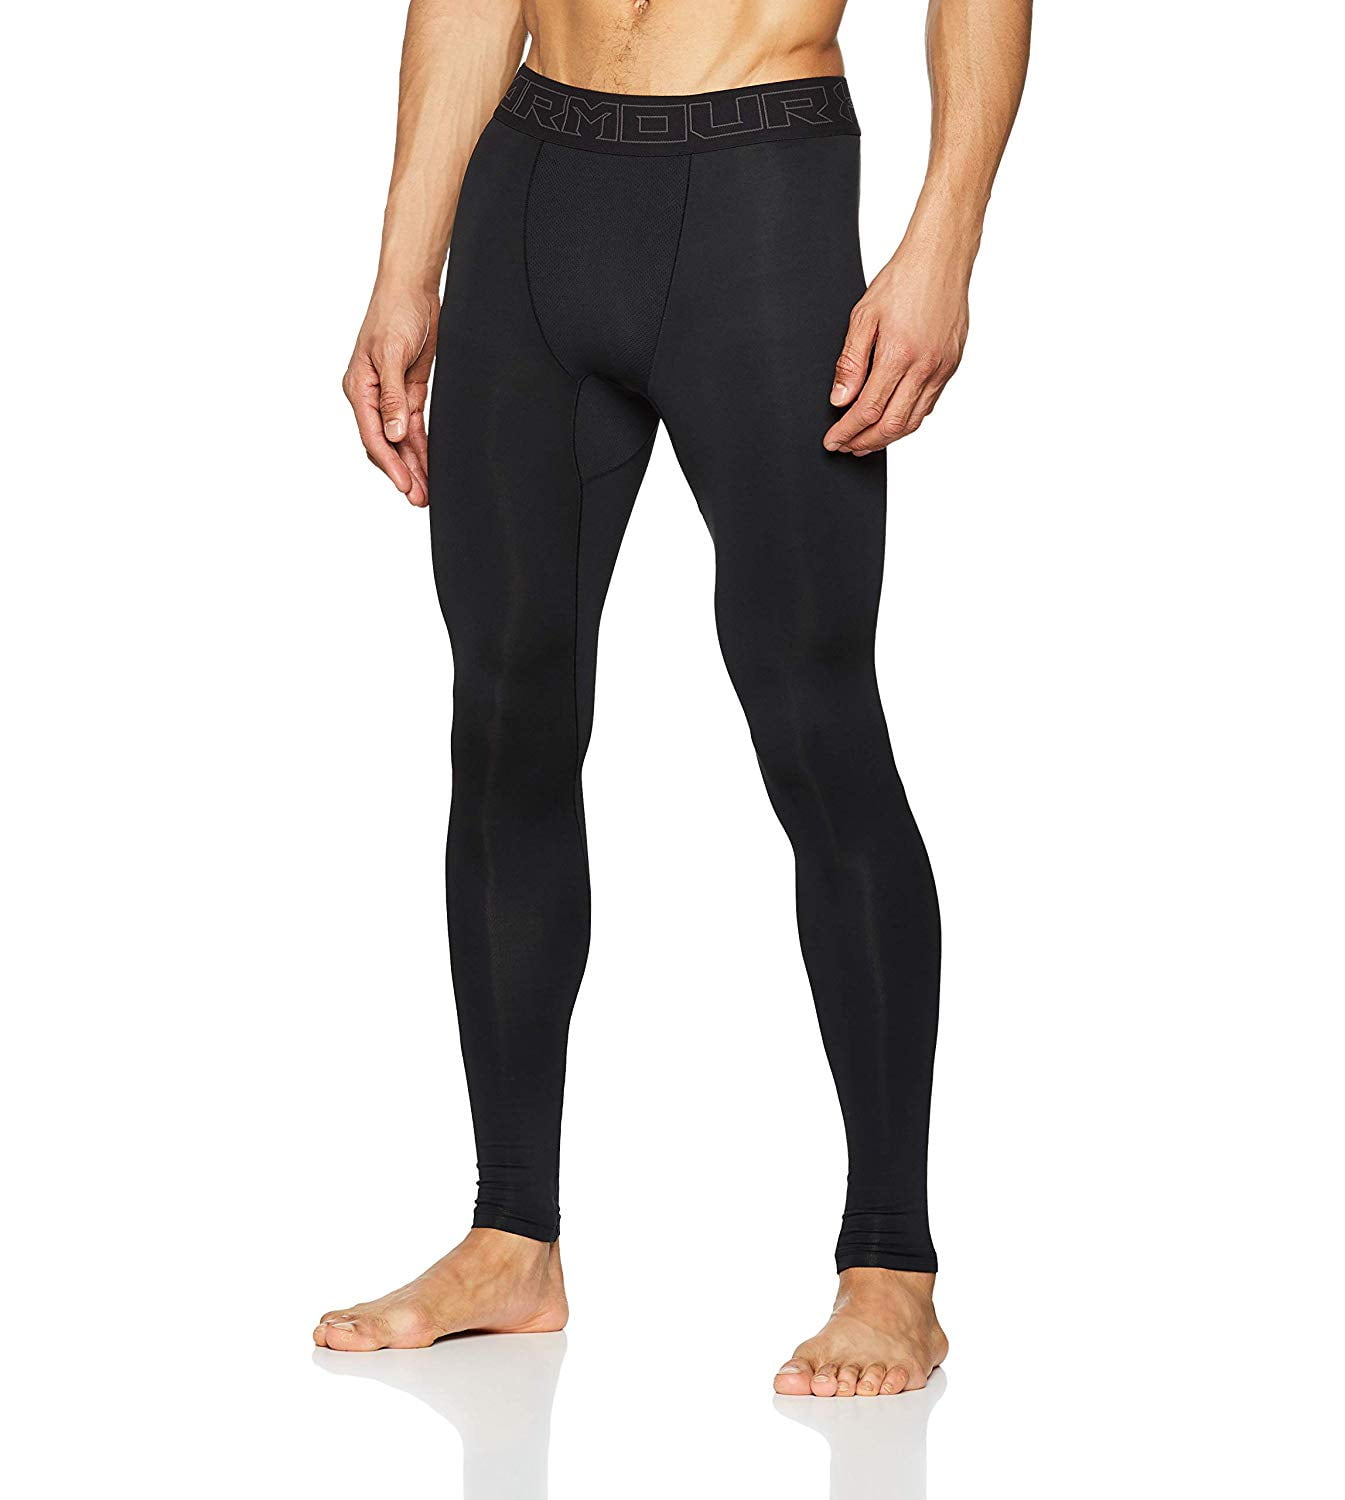 Under Armour Training ColdGear Compression Tights In Red 1301582-916